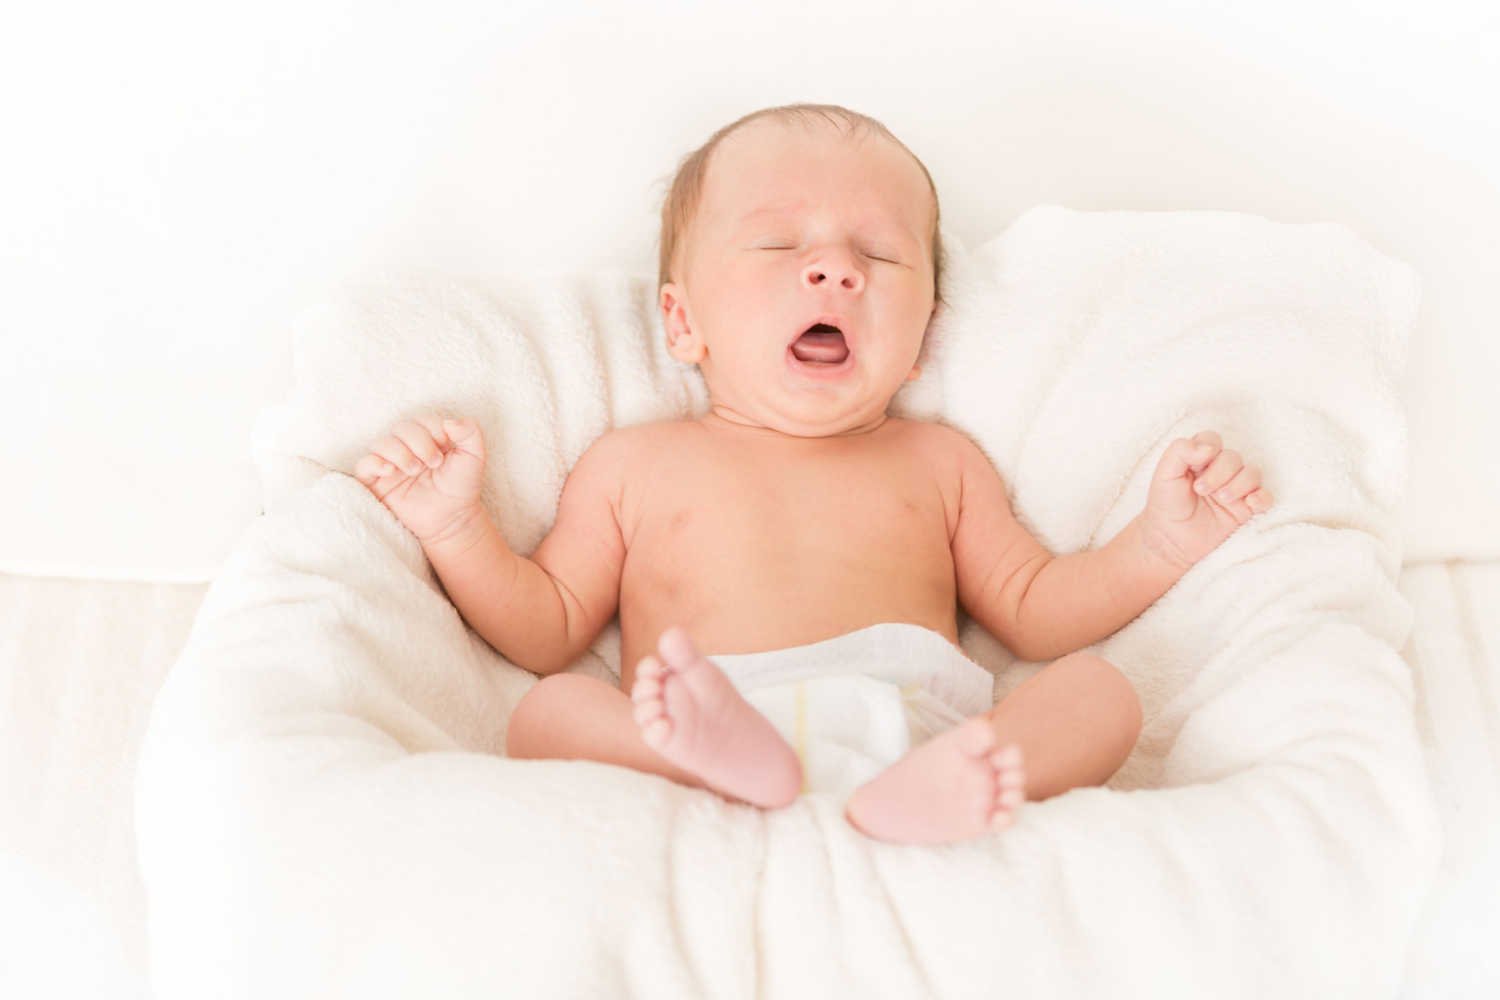 Causes of Hand, Foot and Mouth Disease in Babies